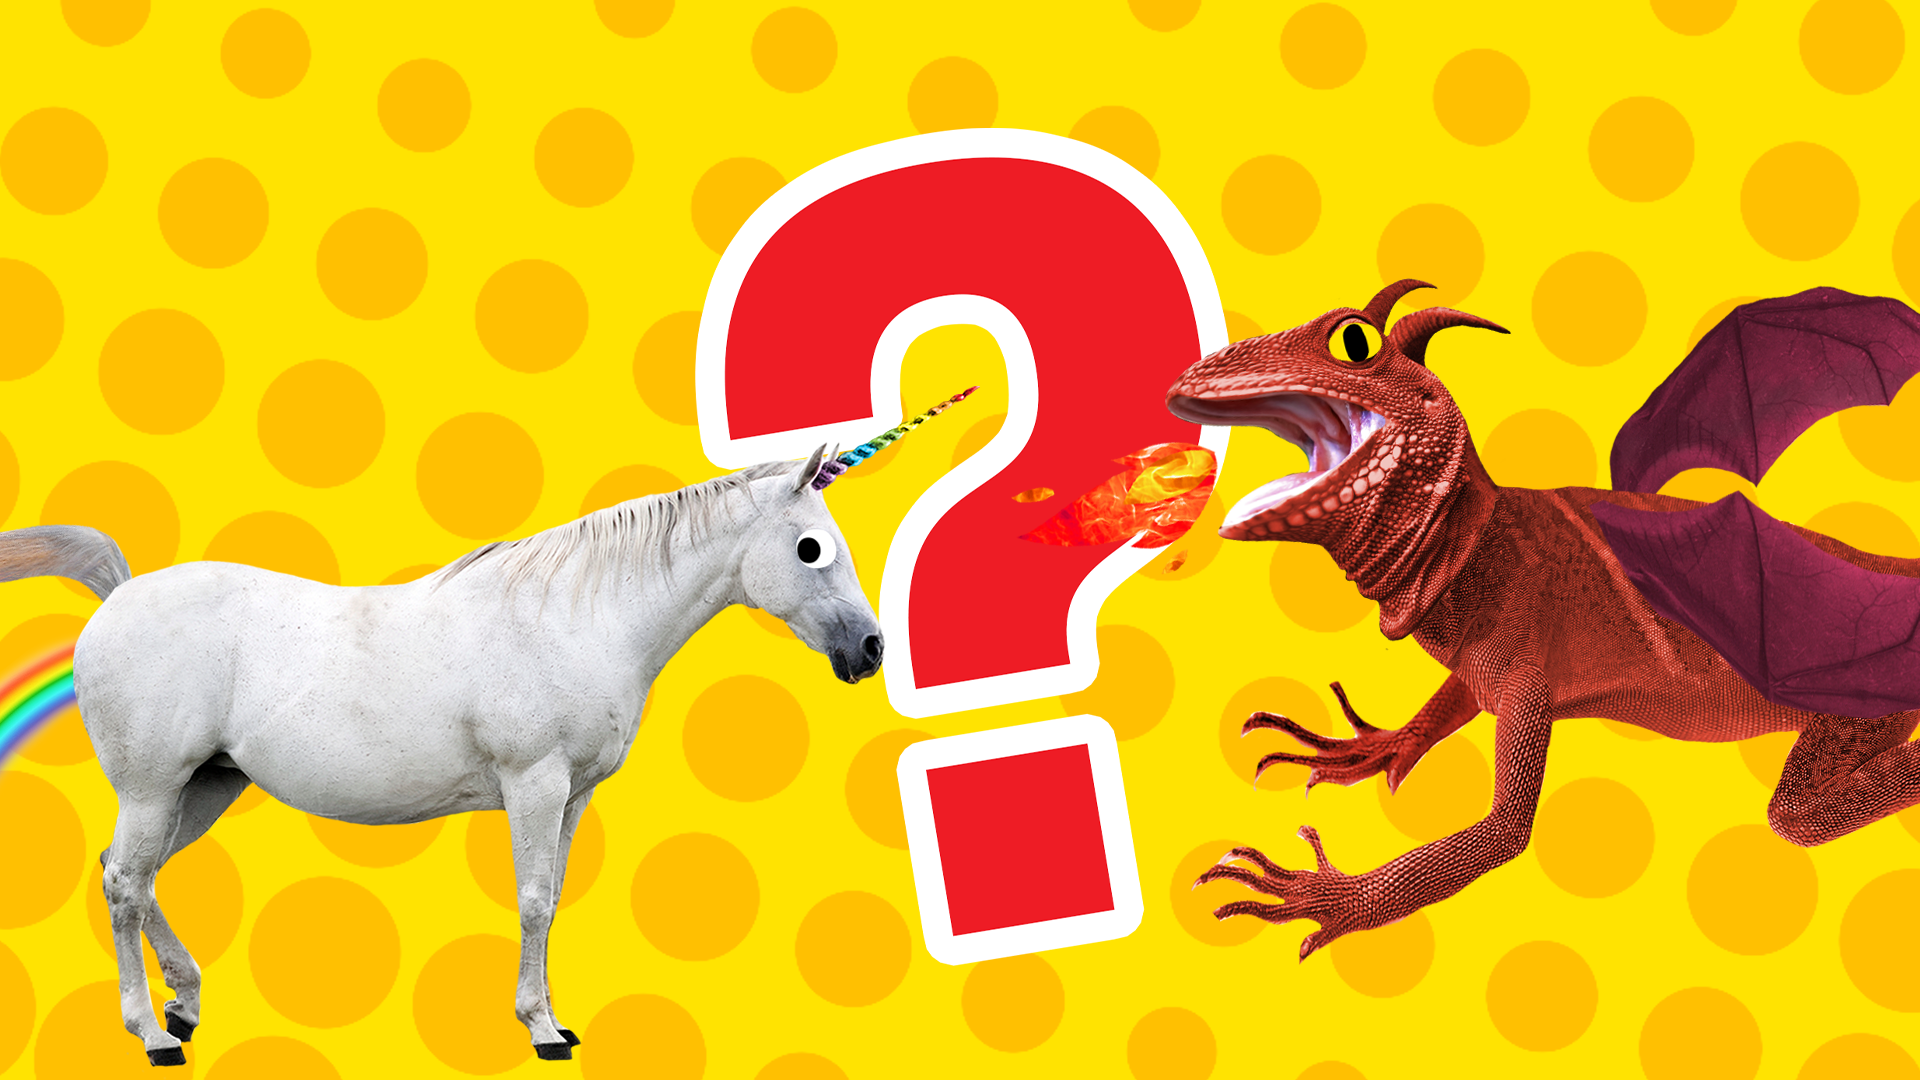 Unicorn  and dragon with question mark on yellow background